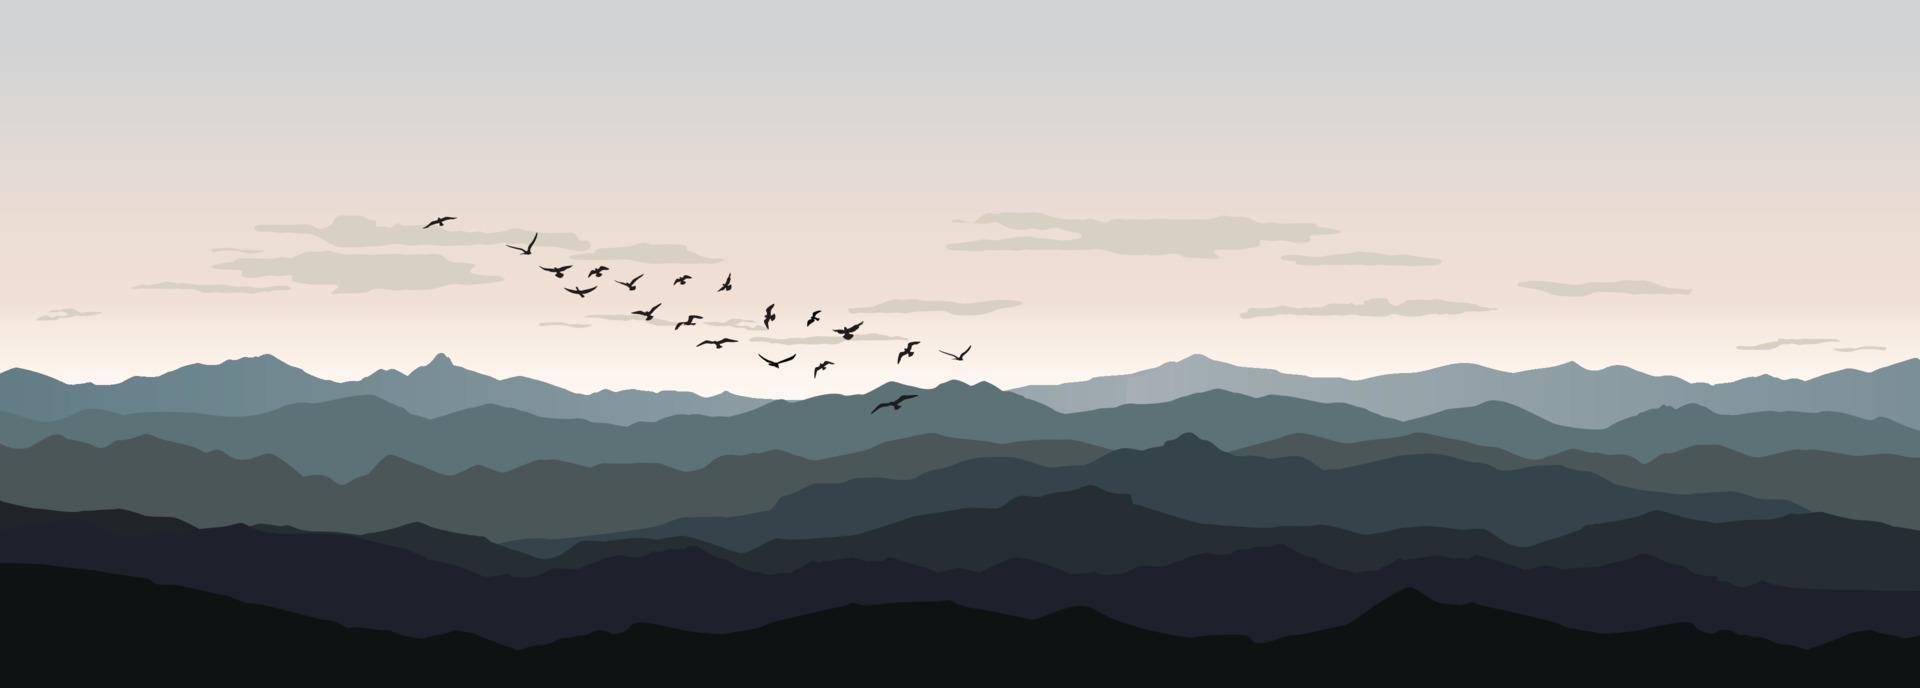 Rural nature landscape. Bird flying silhouette over hills and sky background. Animal wildlife mountain skyline.  Resort view background vector